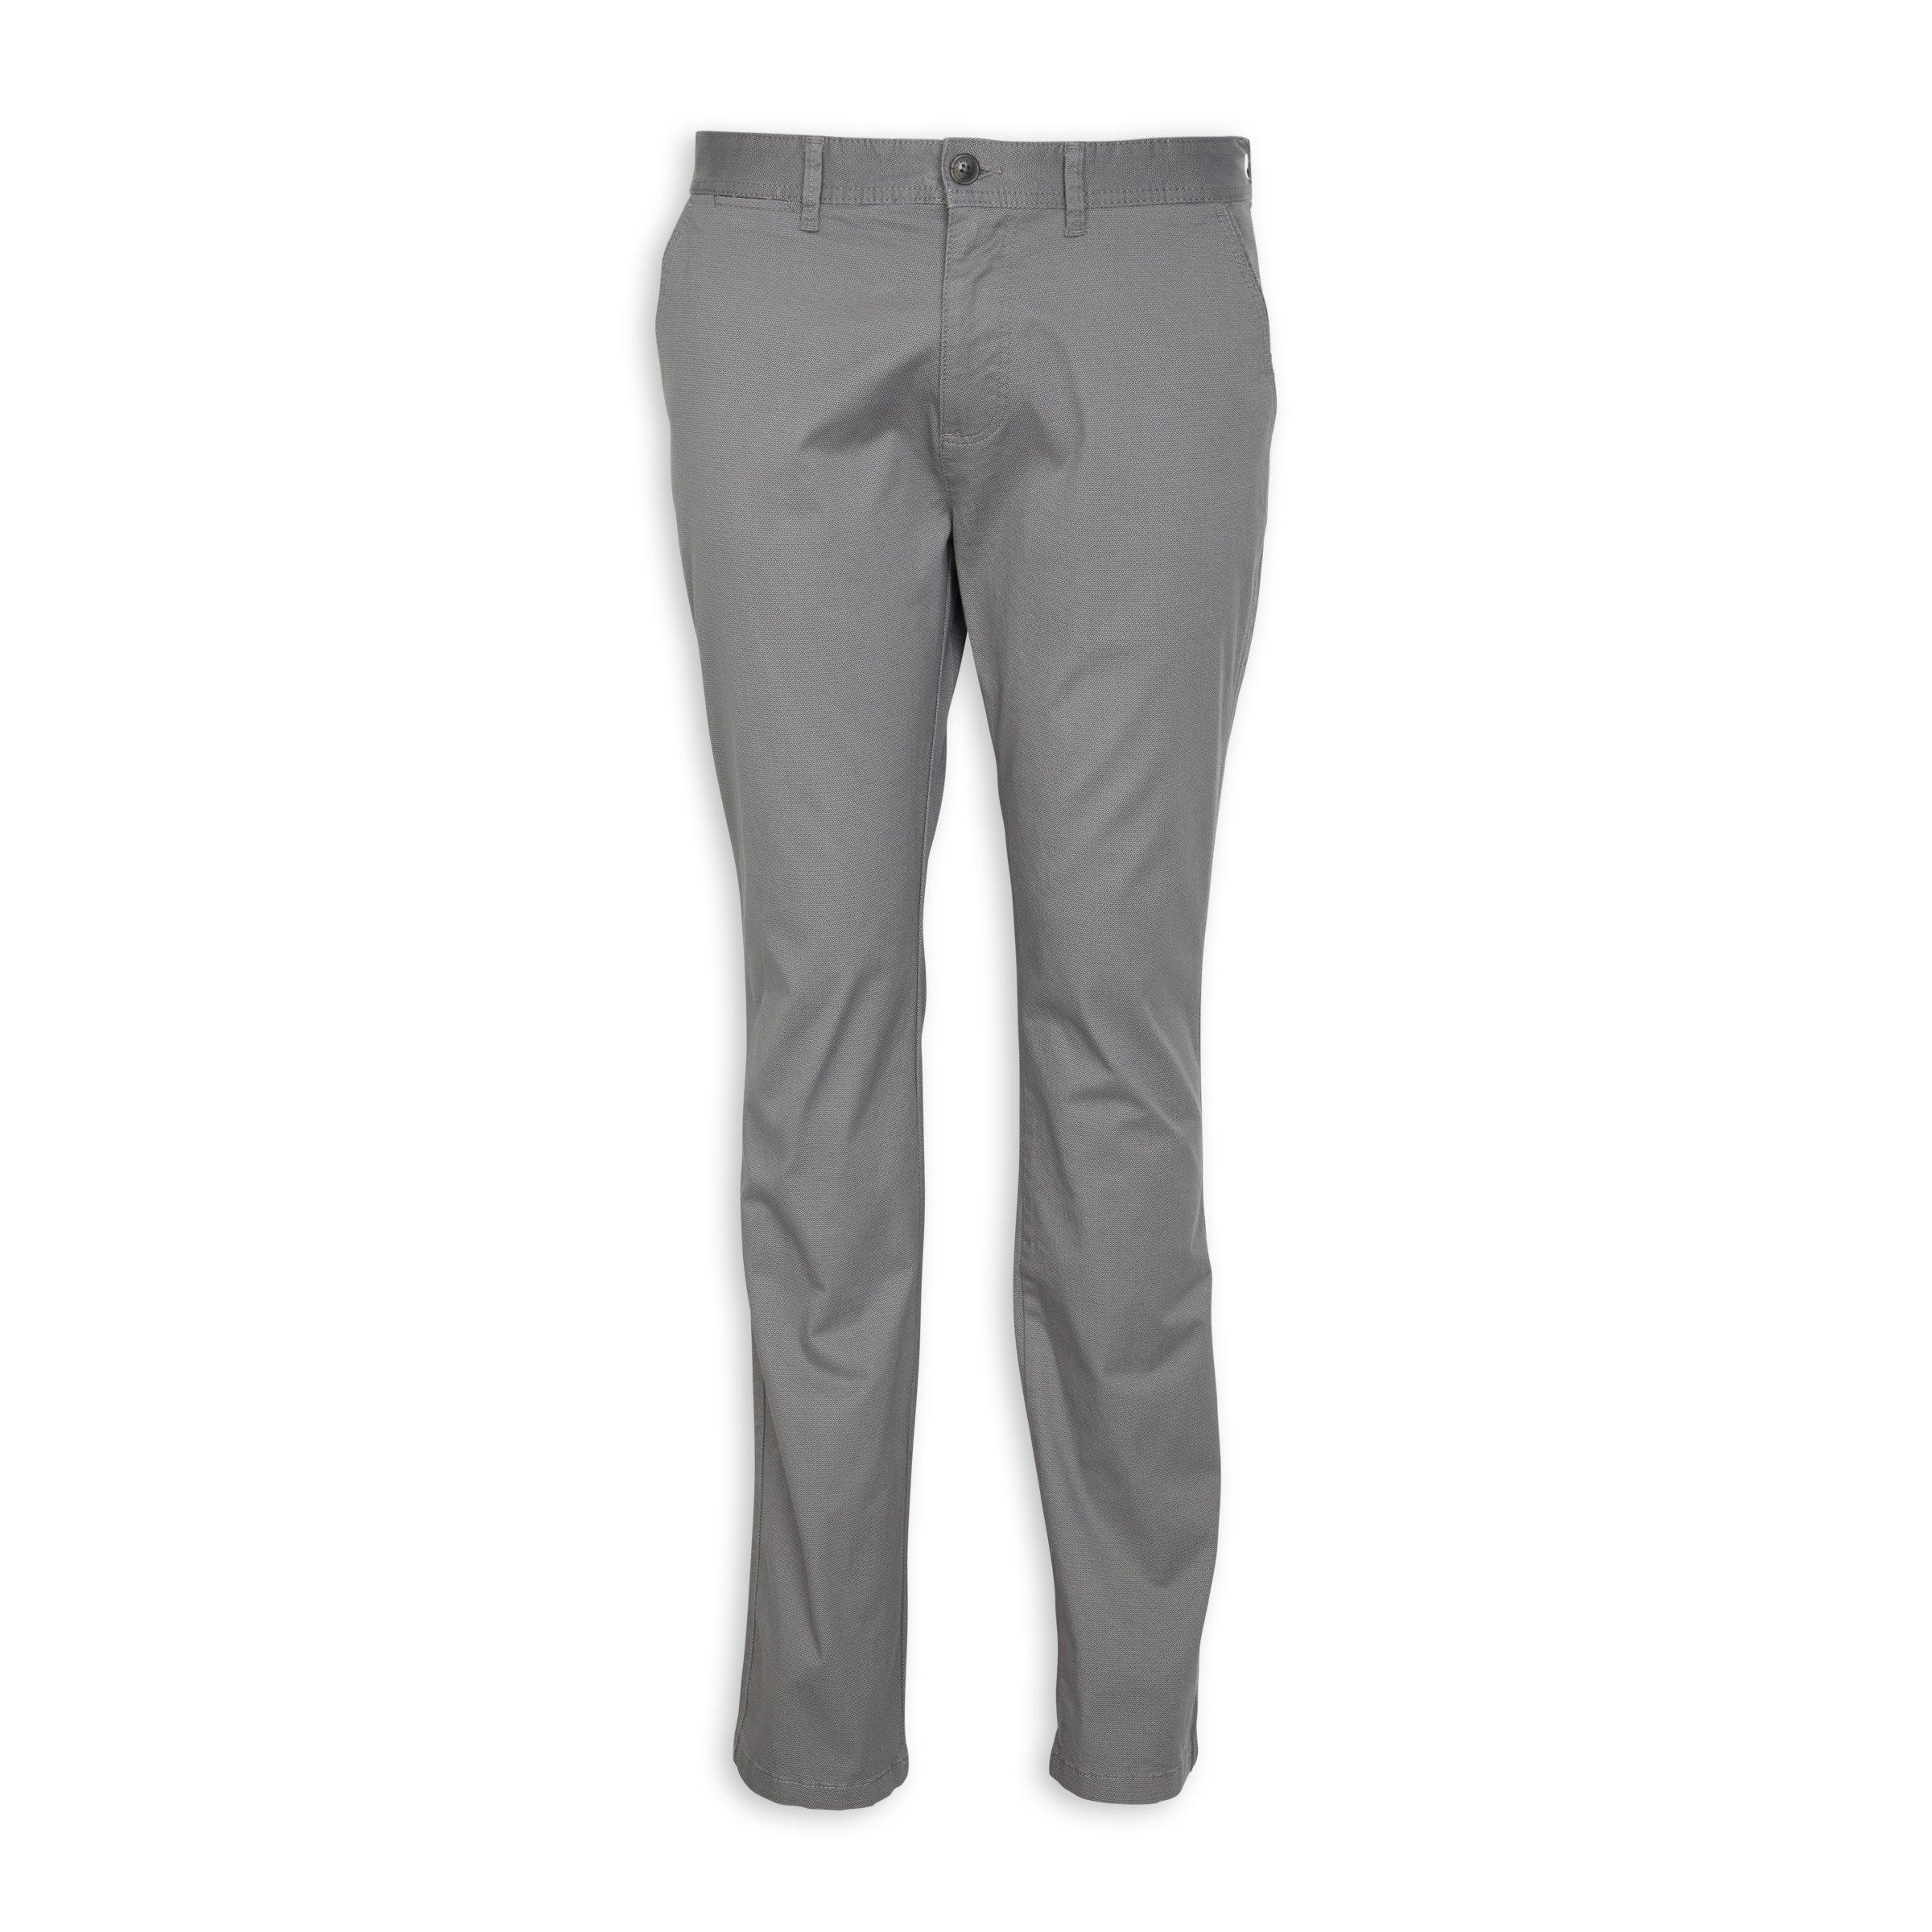 Shop Now Grey Slim Fit Chino Pants Online from Cougar